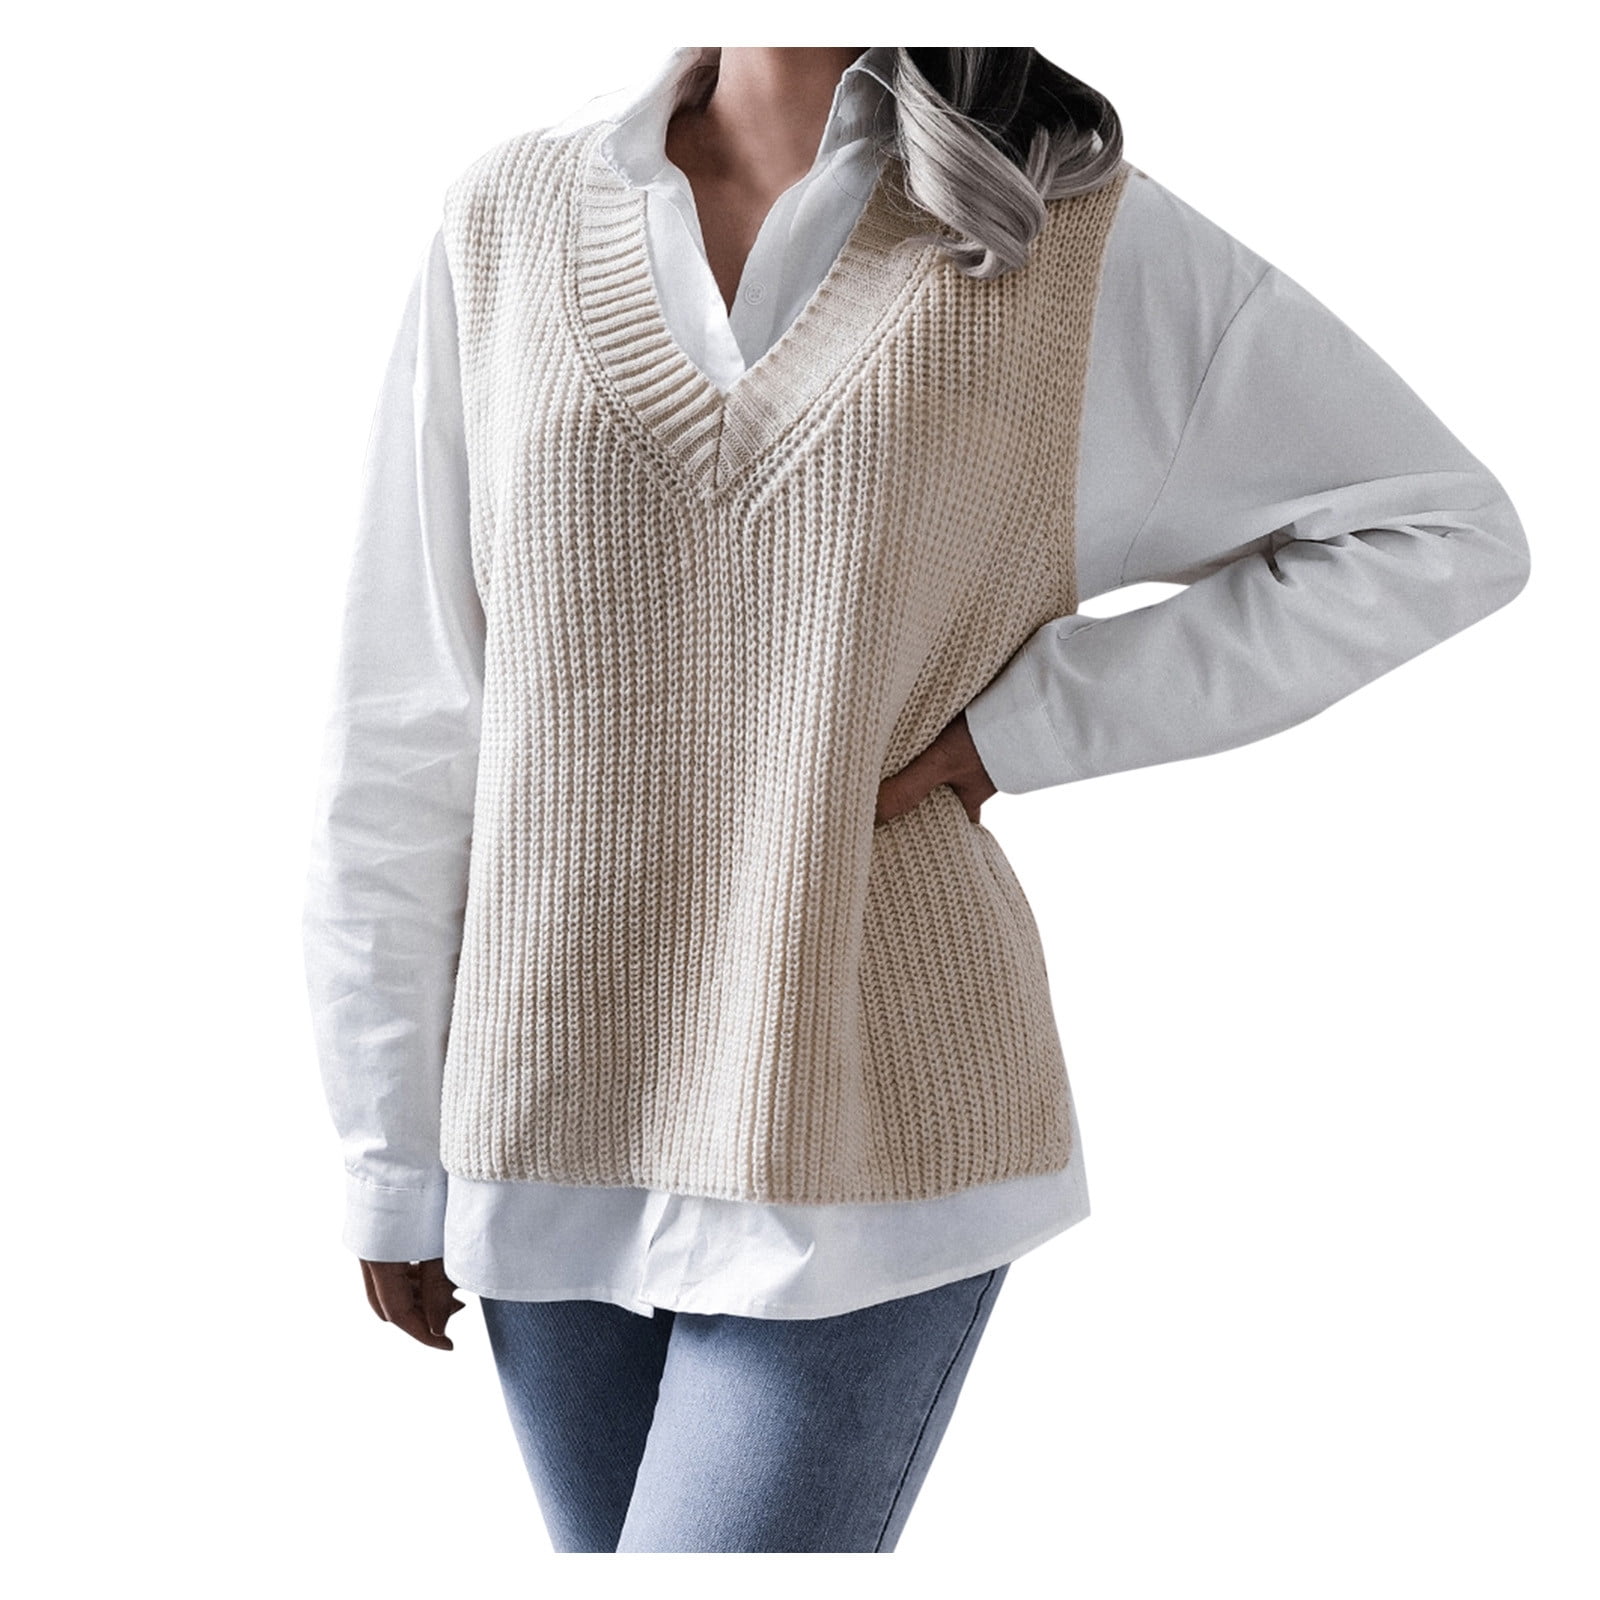 Womens Autumn And Winter Classic Solid Color Knitted Vest V-neck Sleeveless  Warm Sweatshirt Pullover Tops plus Size Long Winter Jackets for Women 3x -  Walmart.com